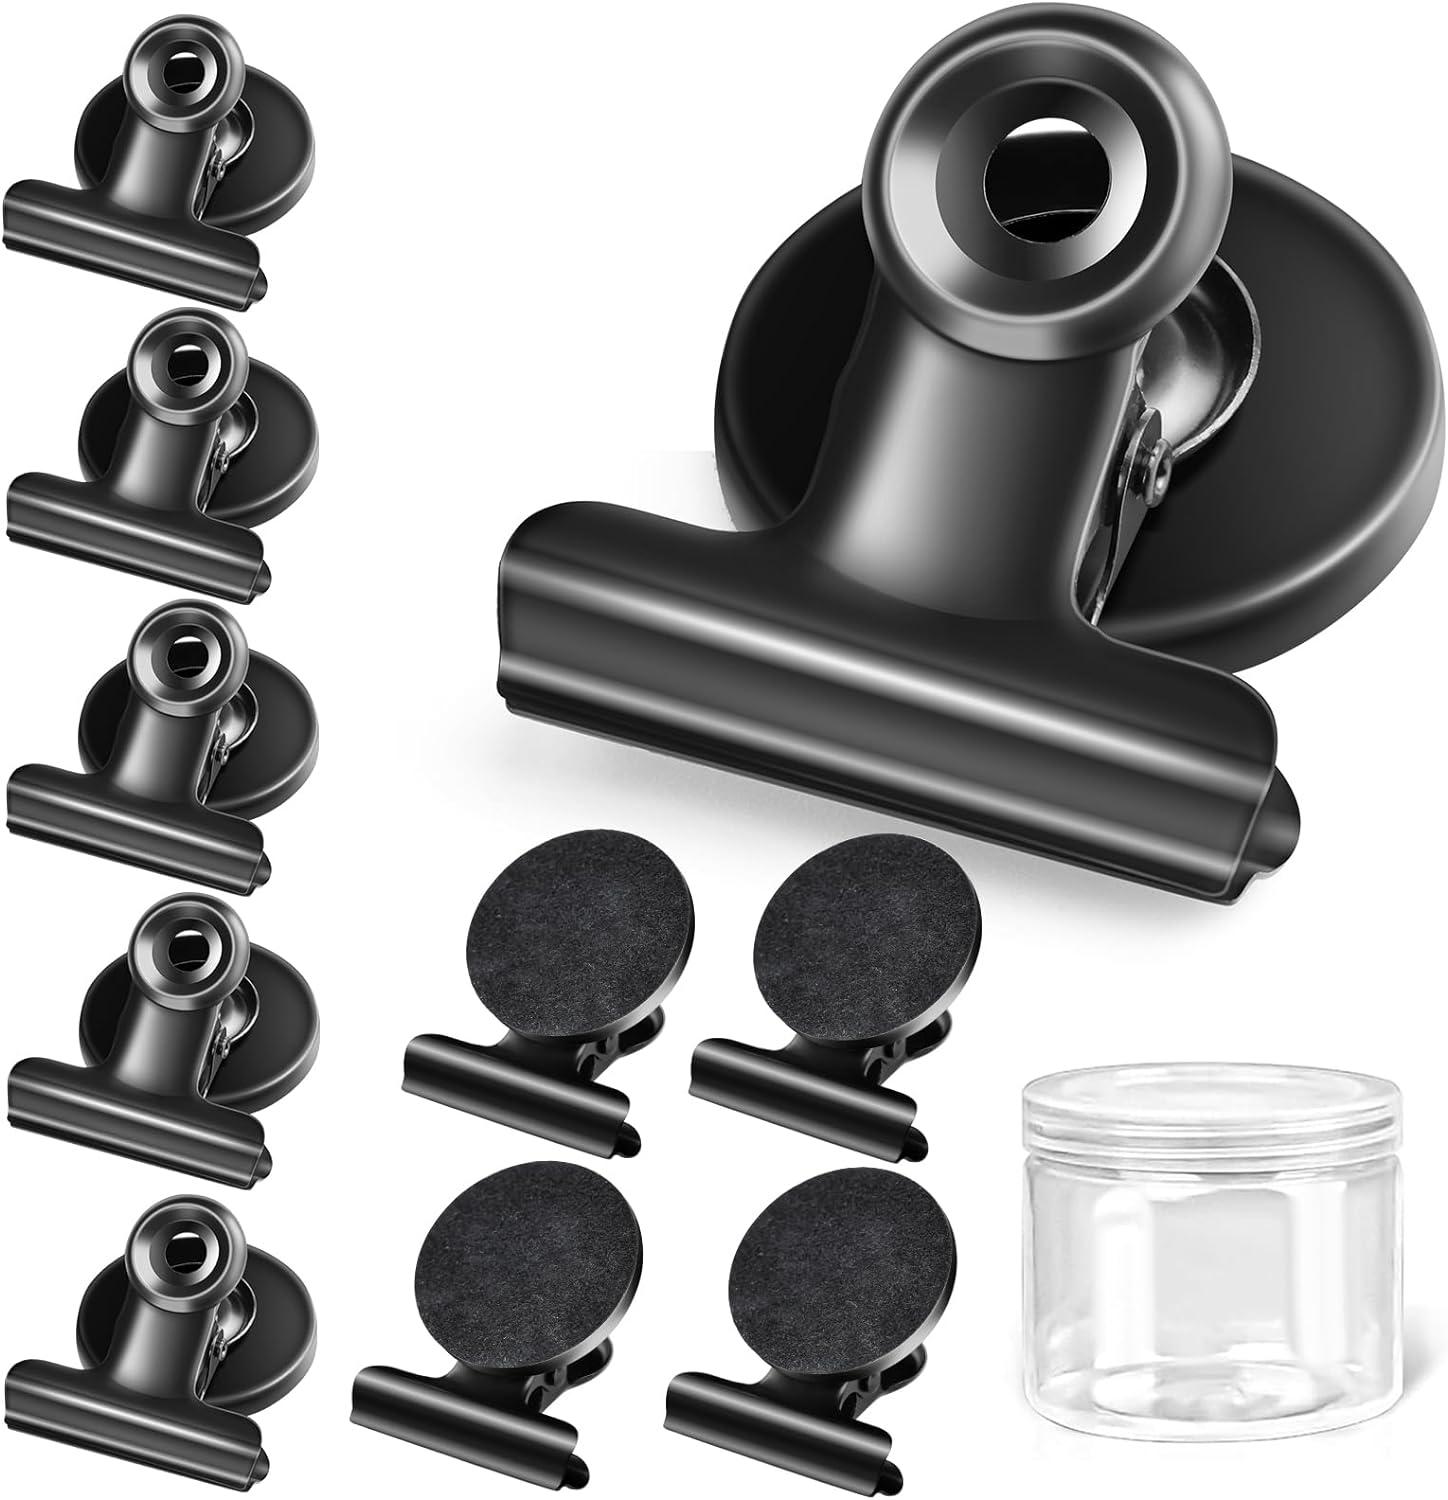 Skaaisont 10 Pcs Magnetic Clips Fridge Magnets Have Anti-scratch Sticky Pads Magnets For Whiteboard Black Whiteboard Ideal For Homes Offices And Schools ‎3 X 3 8 X 2 5 Cm Brand